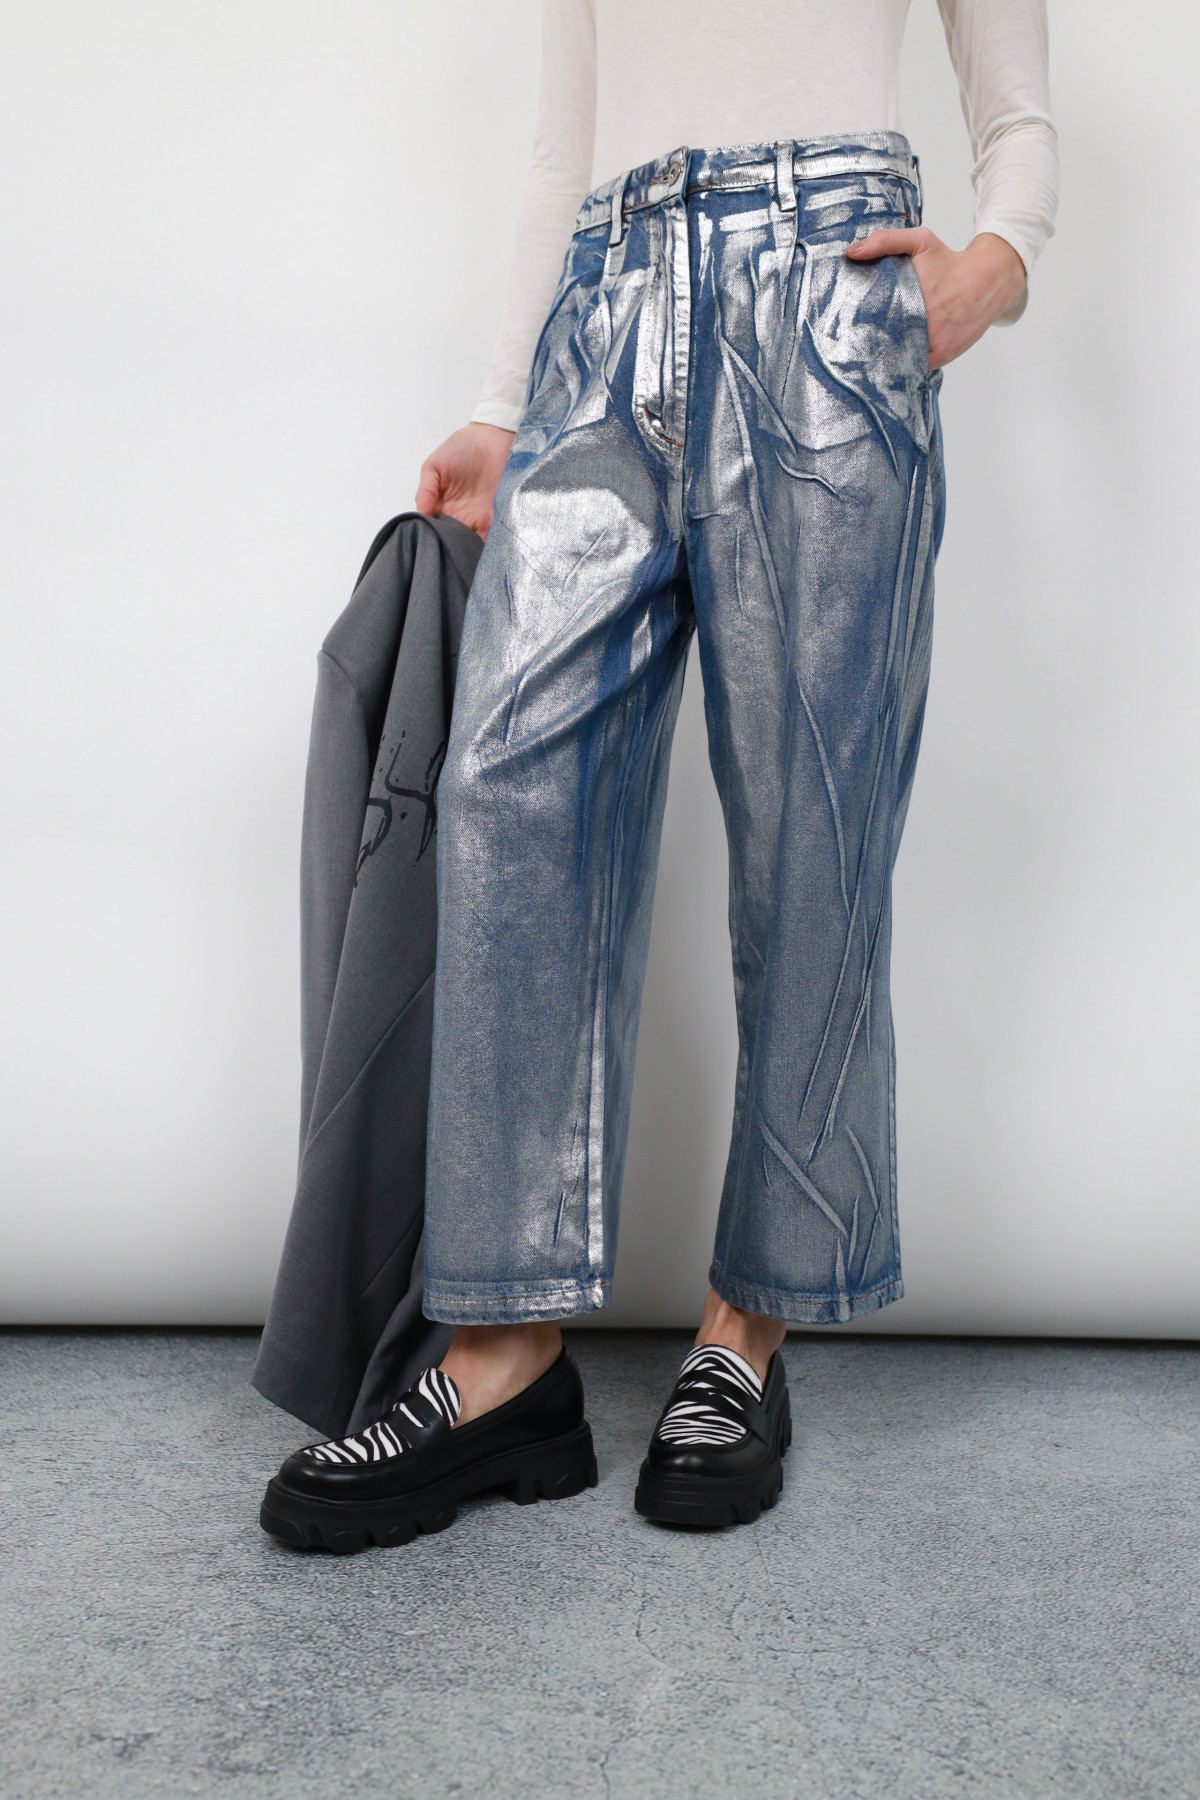 Laminated Jeans